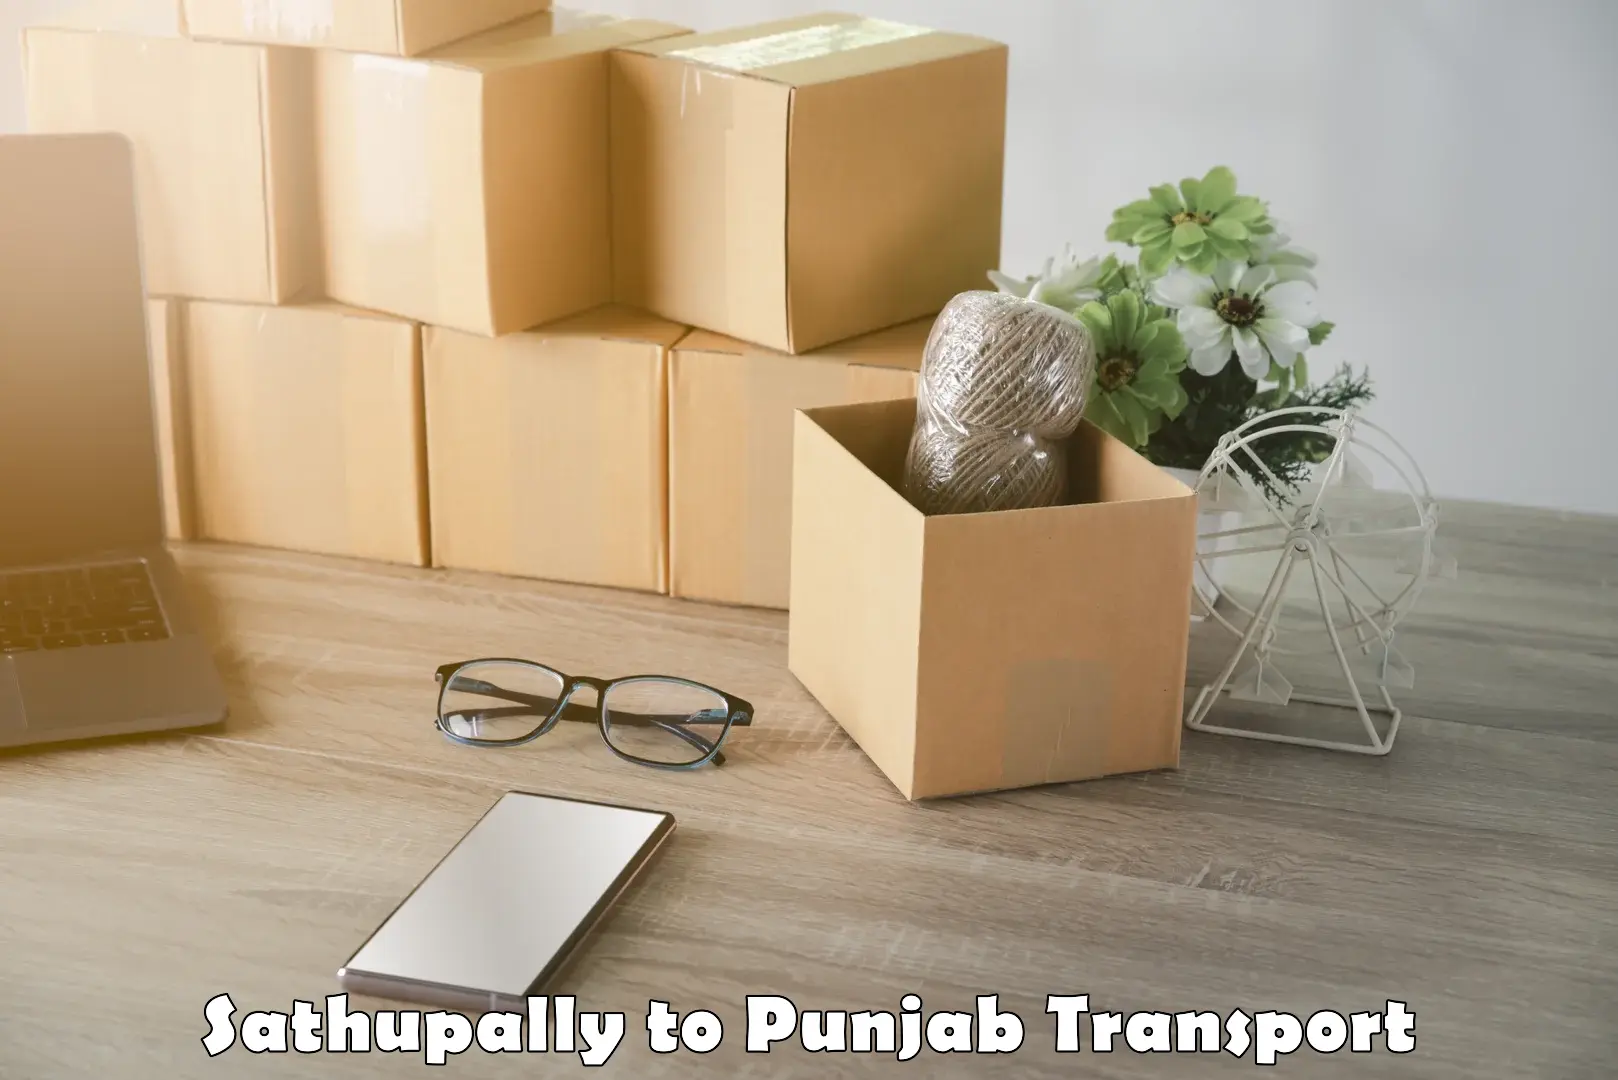 Daily parcel service transport Sathupally to Amritsar